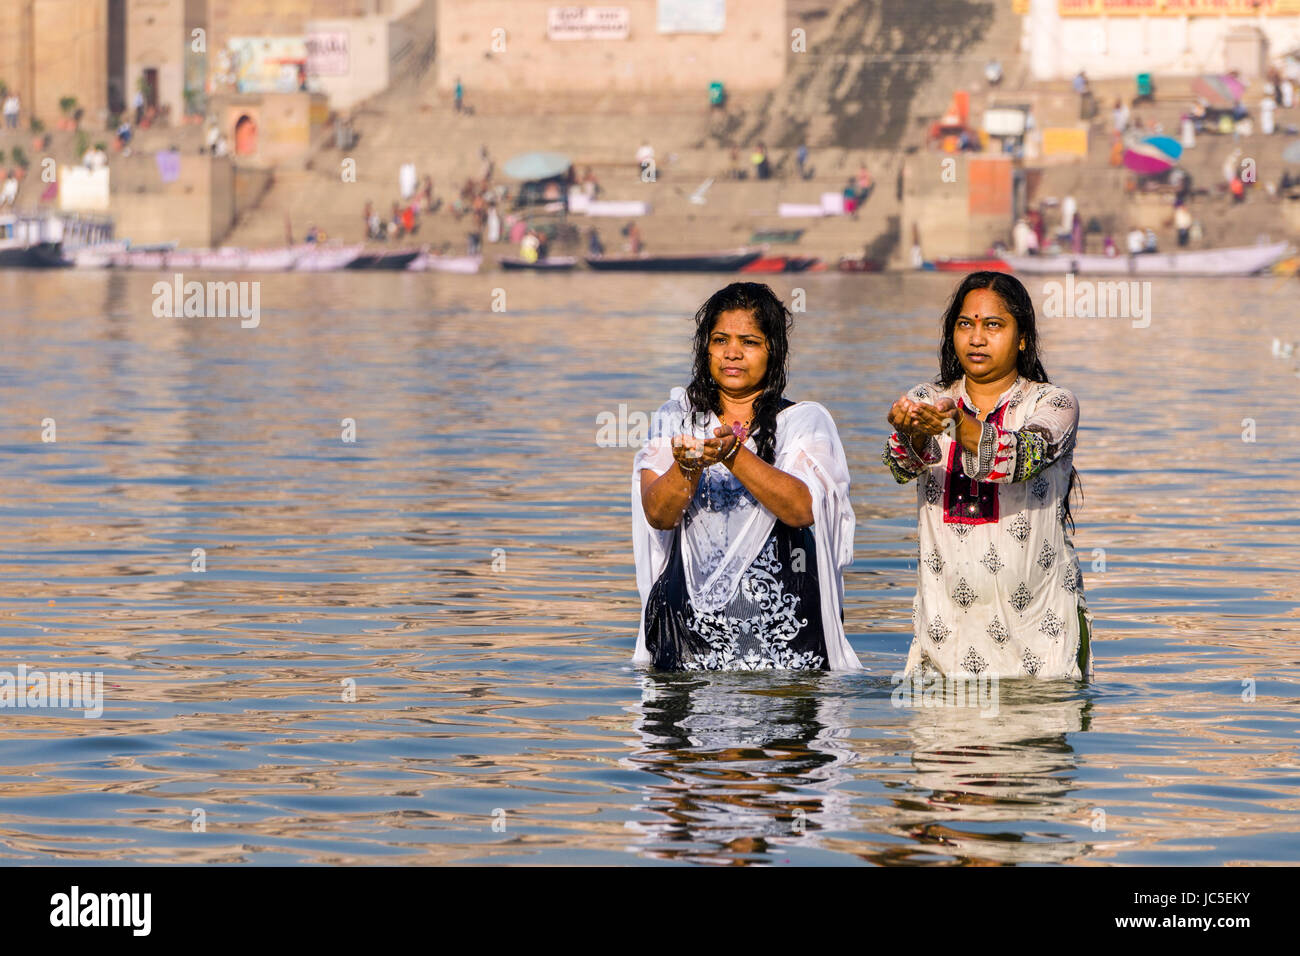 Two women, pilgrims, are taking bath and pray on the sand banks at the holy river Ganges, panorama of Dashashwamedh Ghat, Main Ghat, in the distance Stock Photo